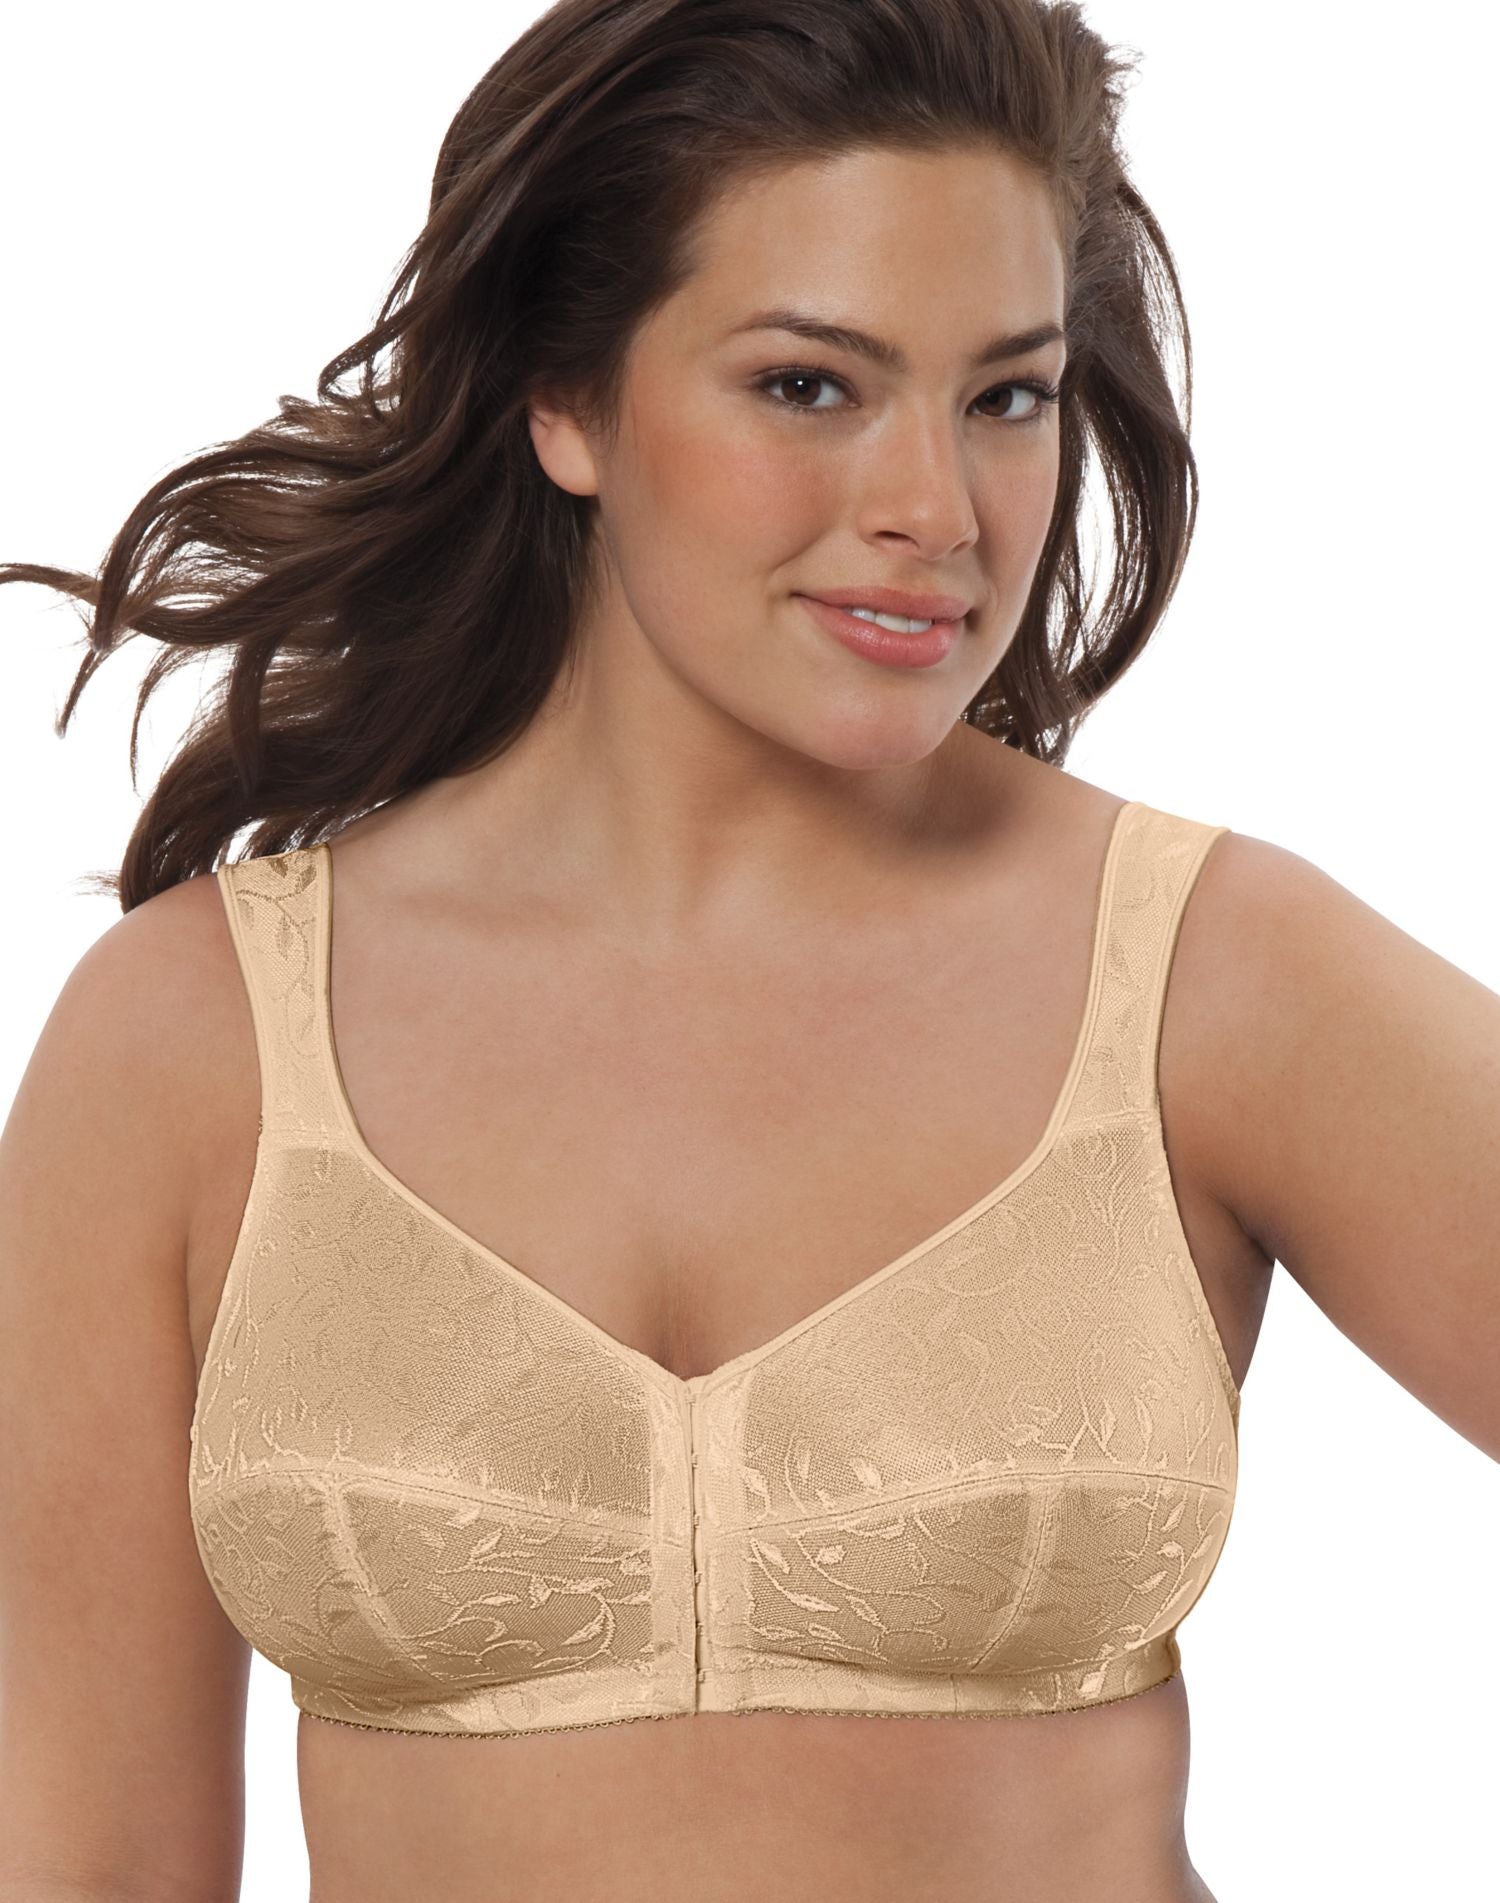 Just My Size Easy-On Front Close Wirefree Bra Nude 48DD Women's